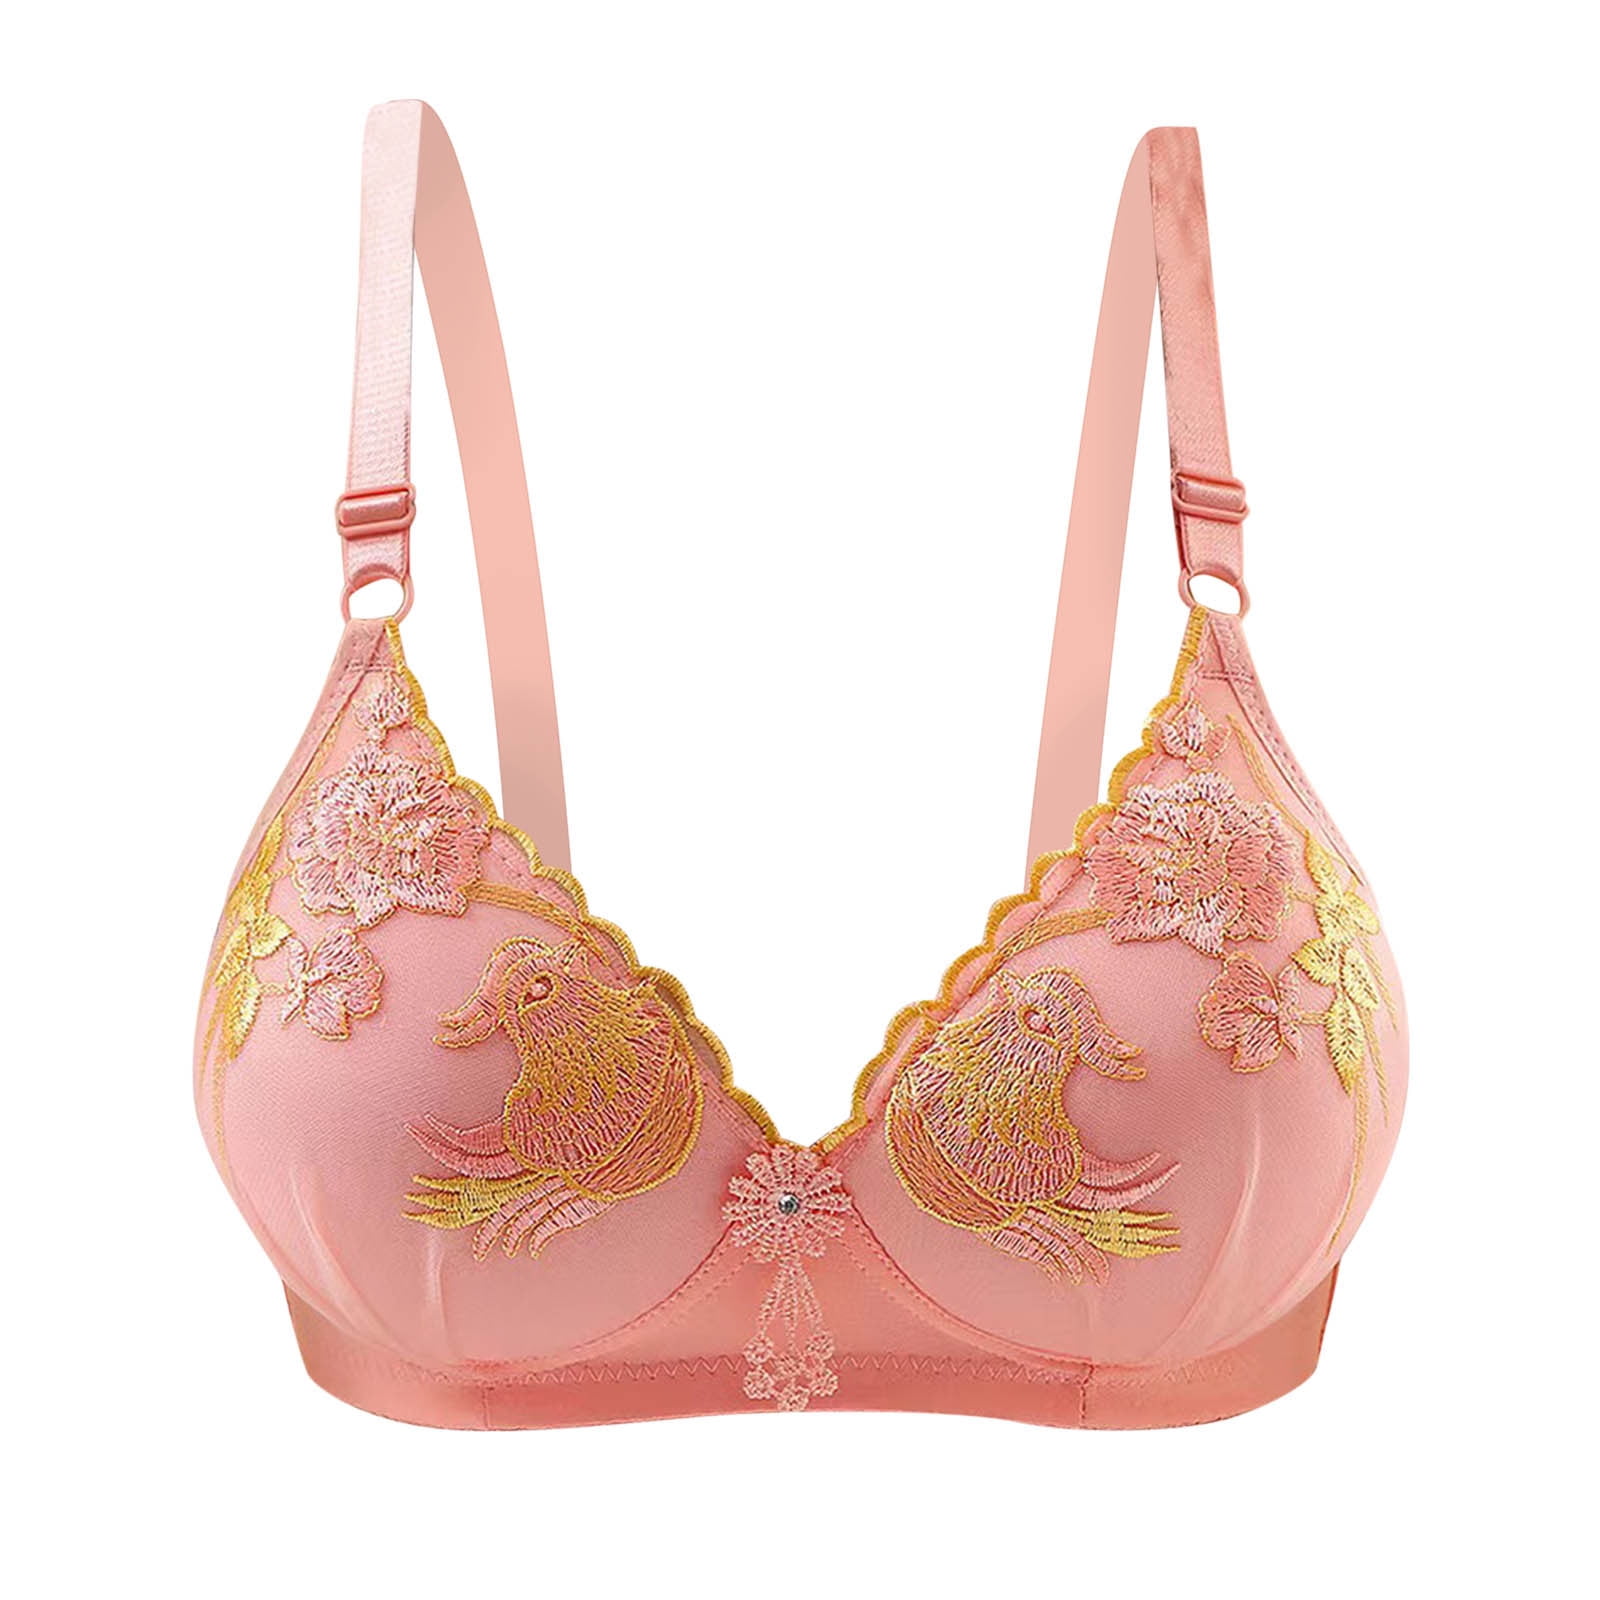 RYRJJ Push Up Bras for Women Embroidered Floral Print Full-Coverage Wireless  Shaping Cup Everyday Bra Comfort No Underwire Bralette(Hot Pink,XL) 